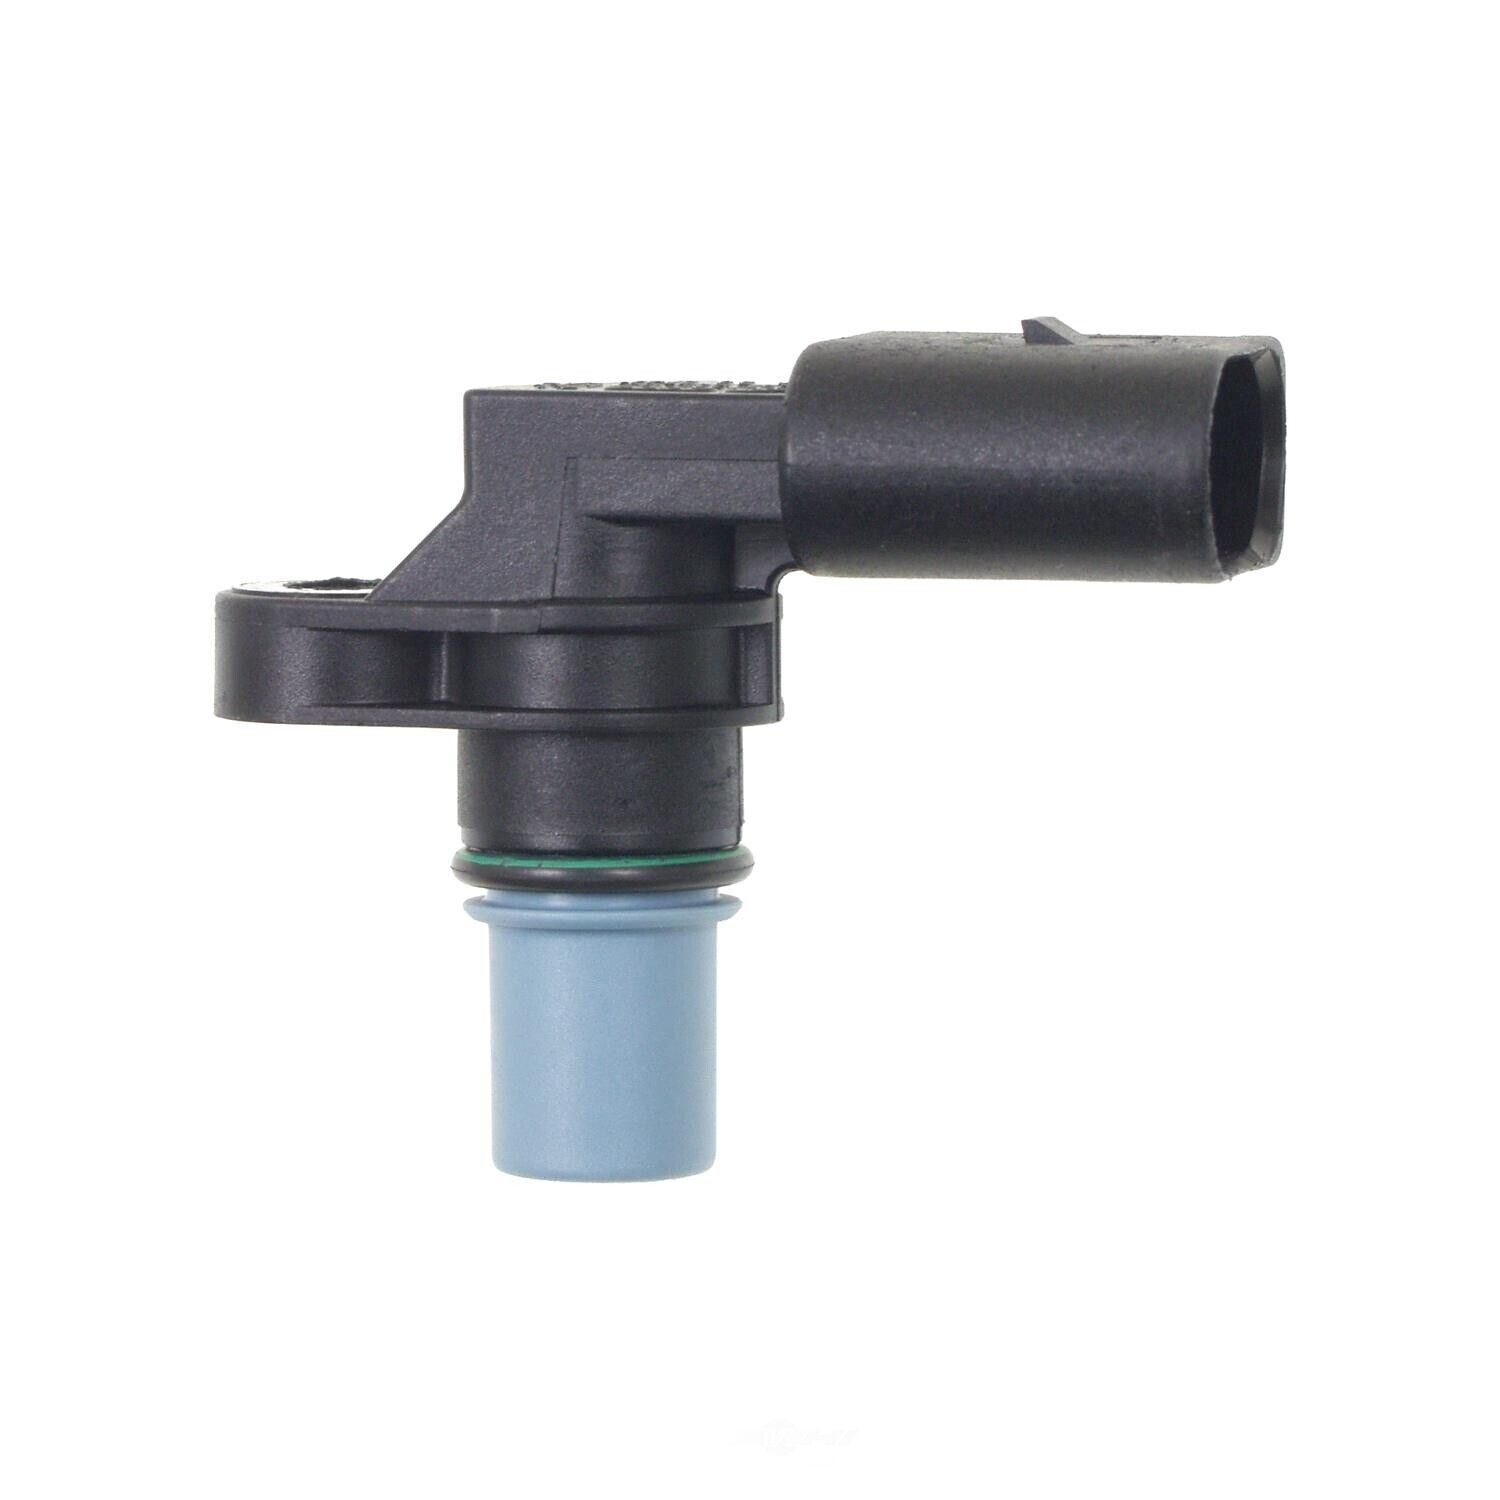 Engine Limited time for free Popular products shipping Camshaft Position Sensor fits S4 Quattr 2004-2009 Audi A4